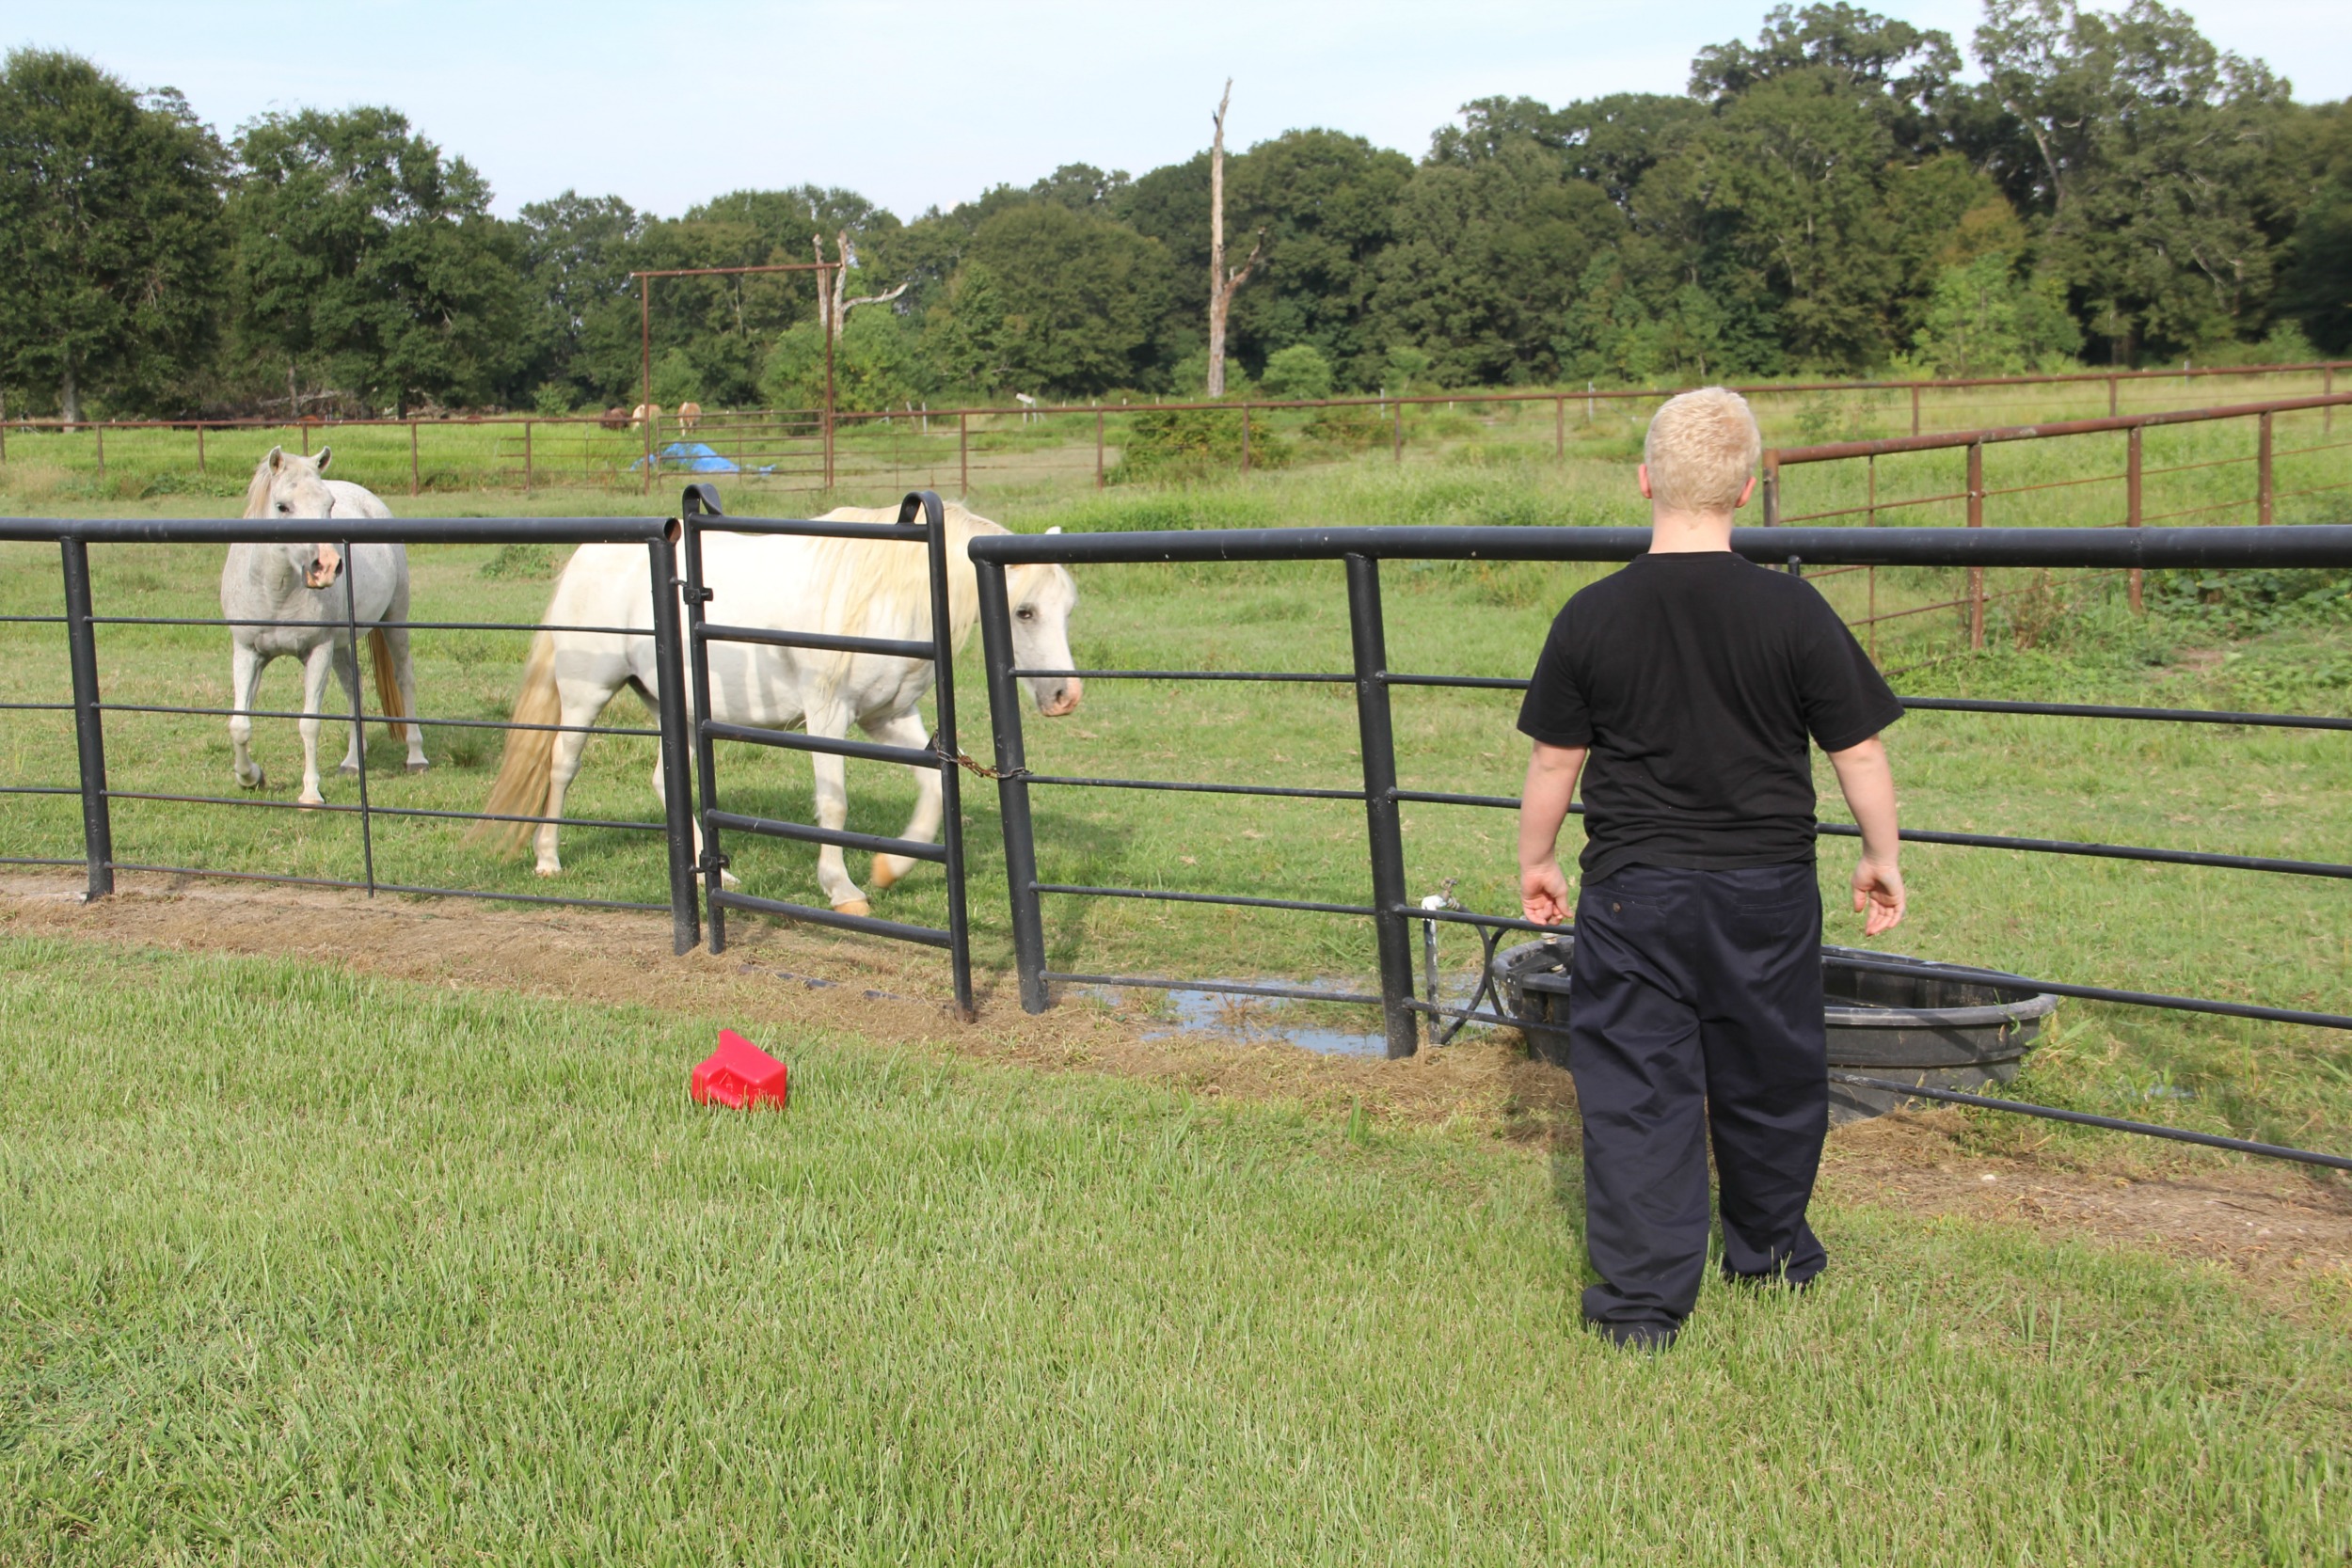 The horses were happy to see their friend Jason when he returned to the Ranch for a visit.